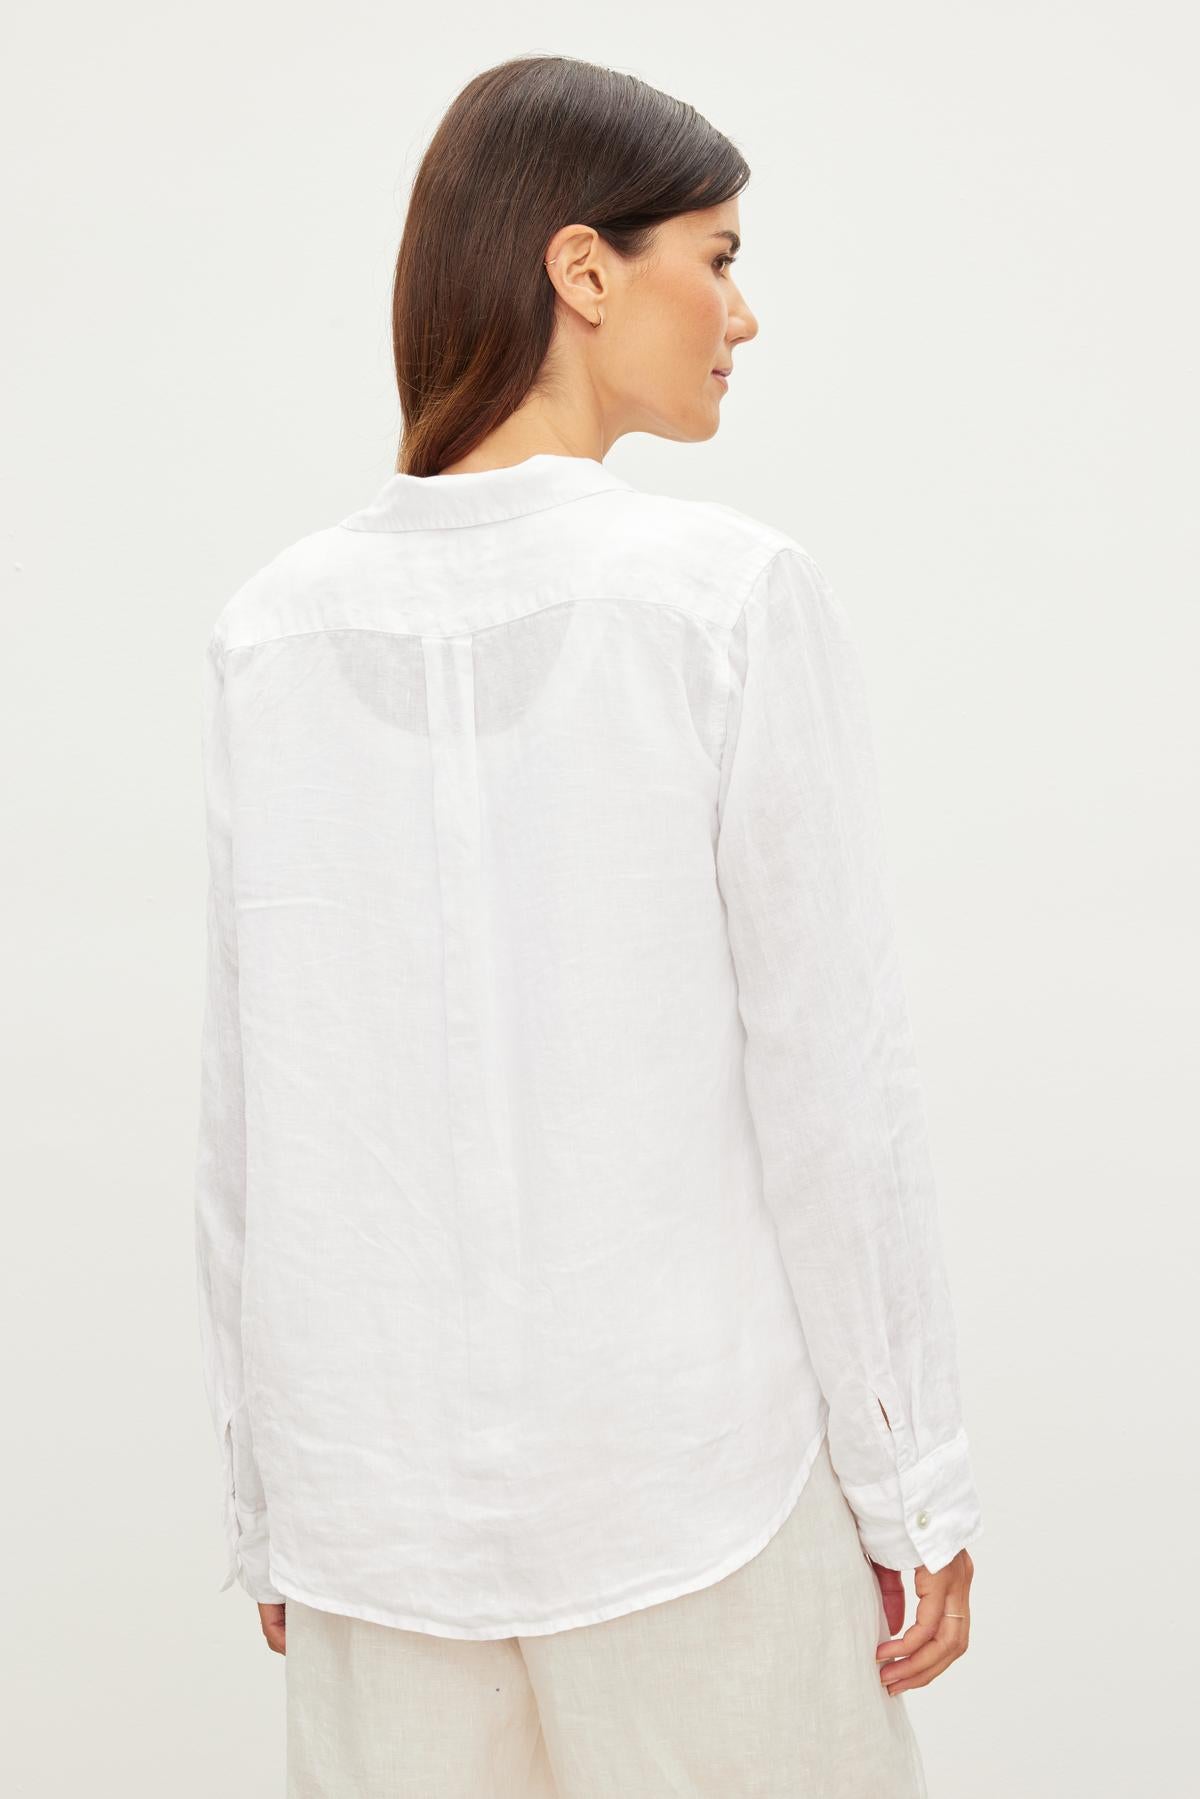 A woman in a Velvet by Graham & Spencer NATALIA LINEN BUTTON-UP SHIRT, perfect for the warmer months.-36010138632385